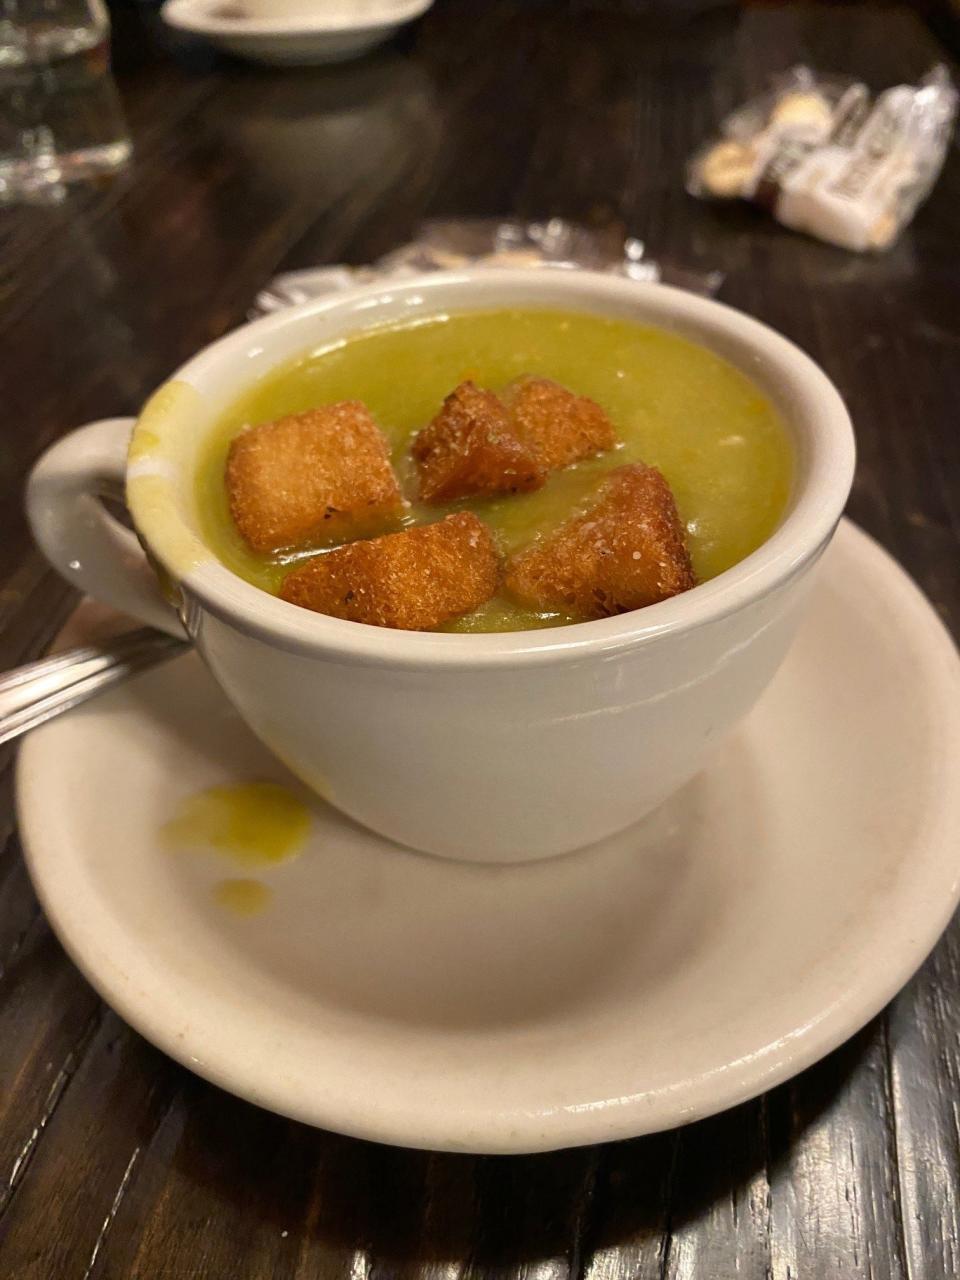 Northjersey.com went investigate Rutt's Hut other dining options beyond its nationally famous Ripper. The pea soup was a standout.